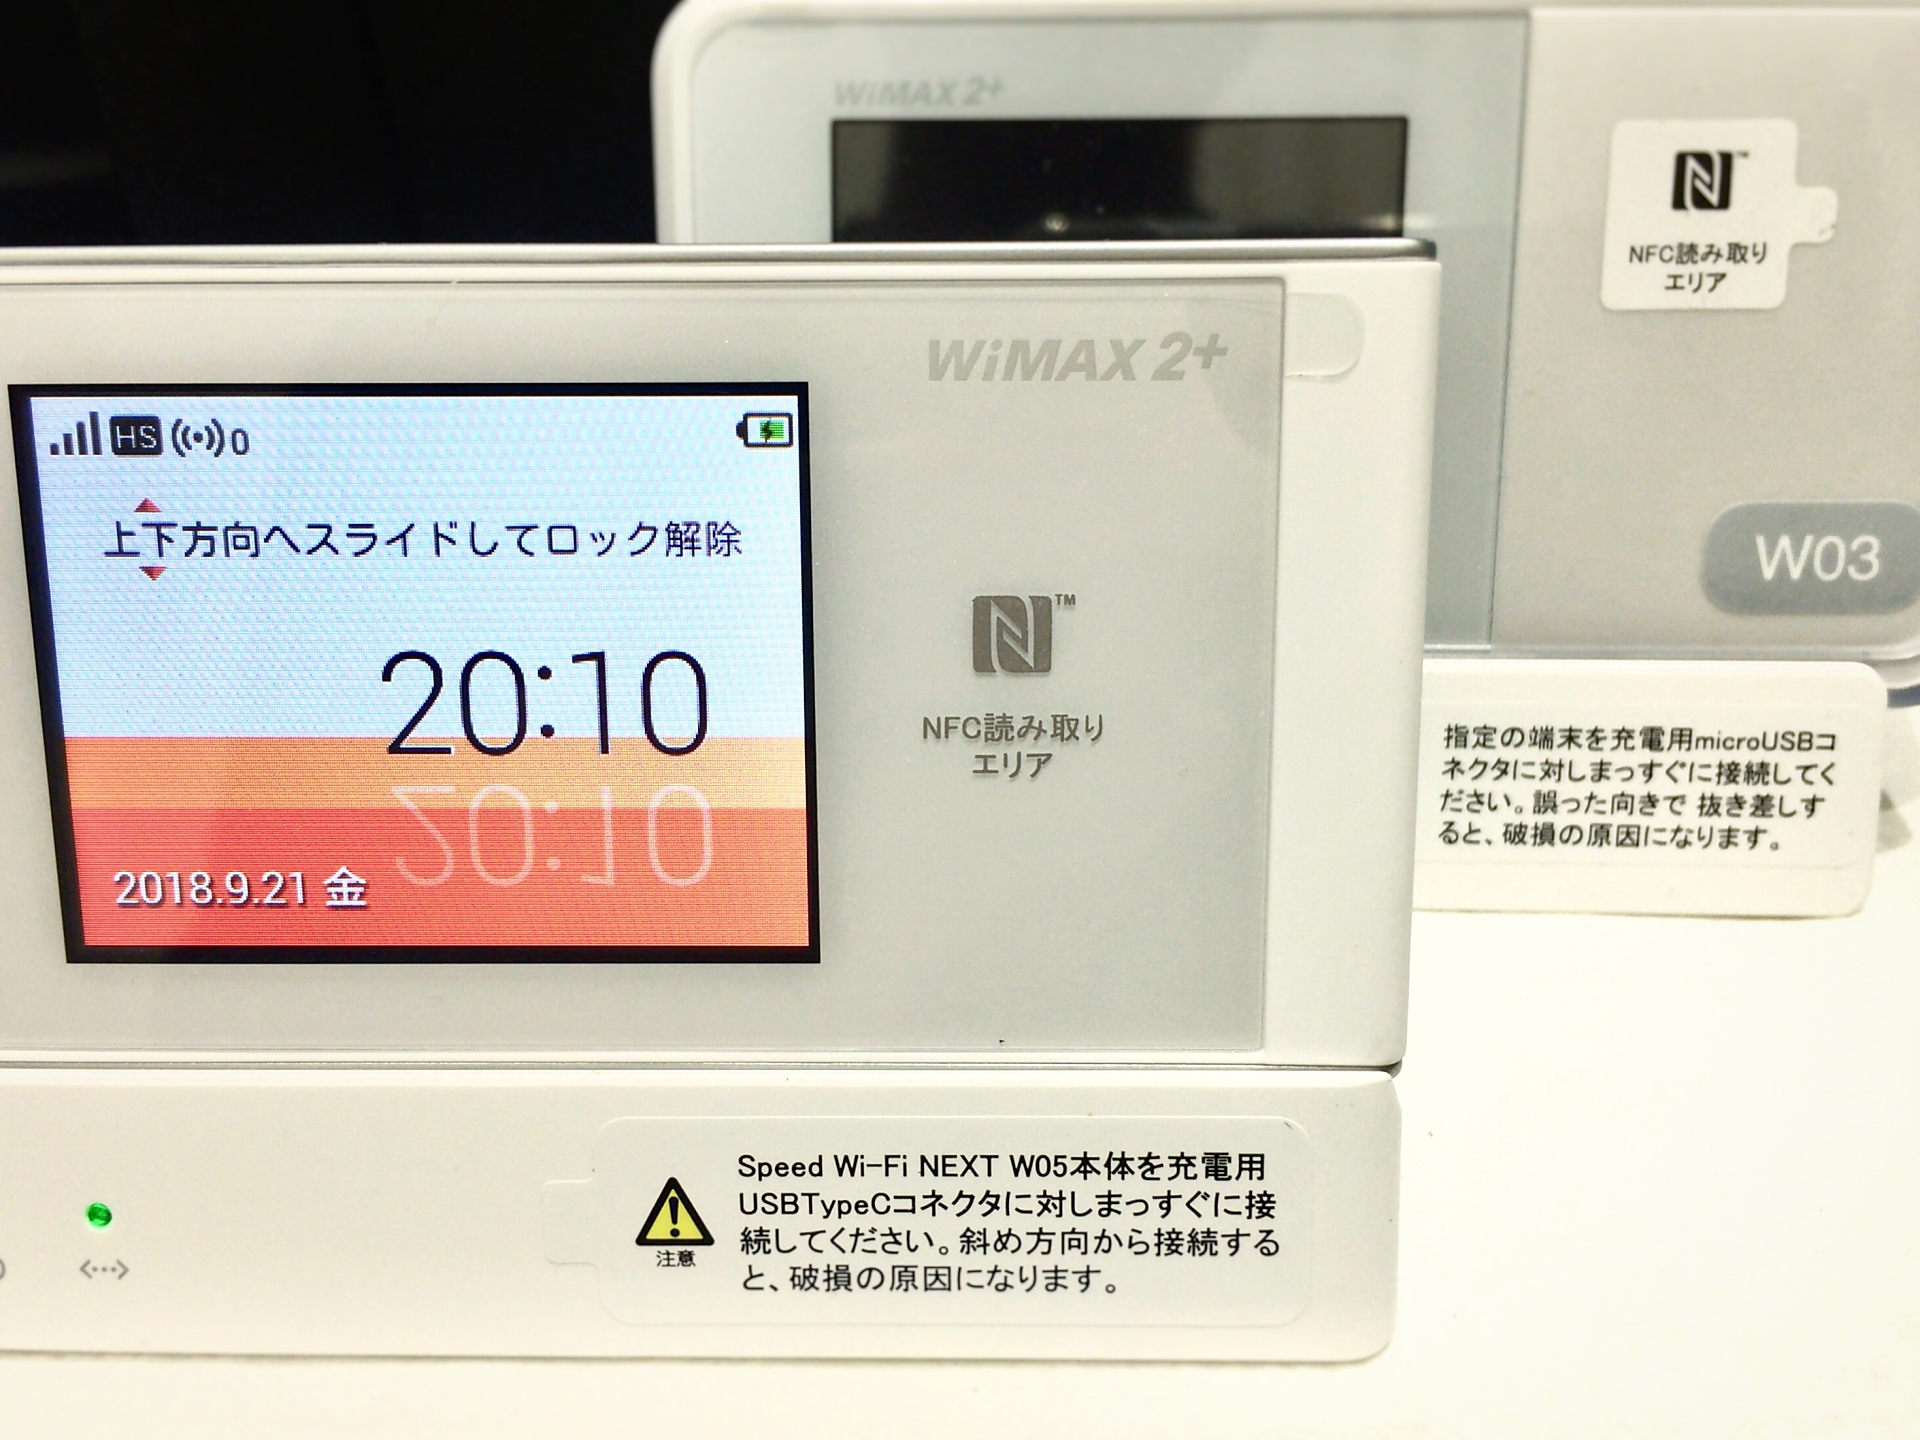 WiMAX 2+ W5とW3